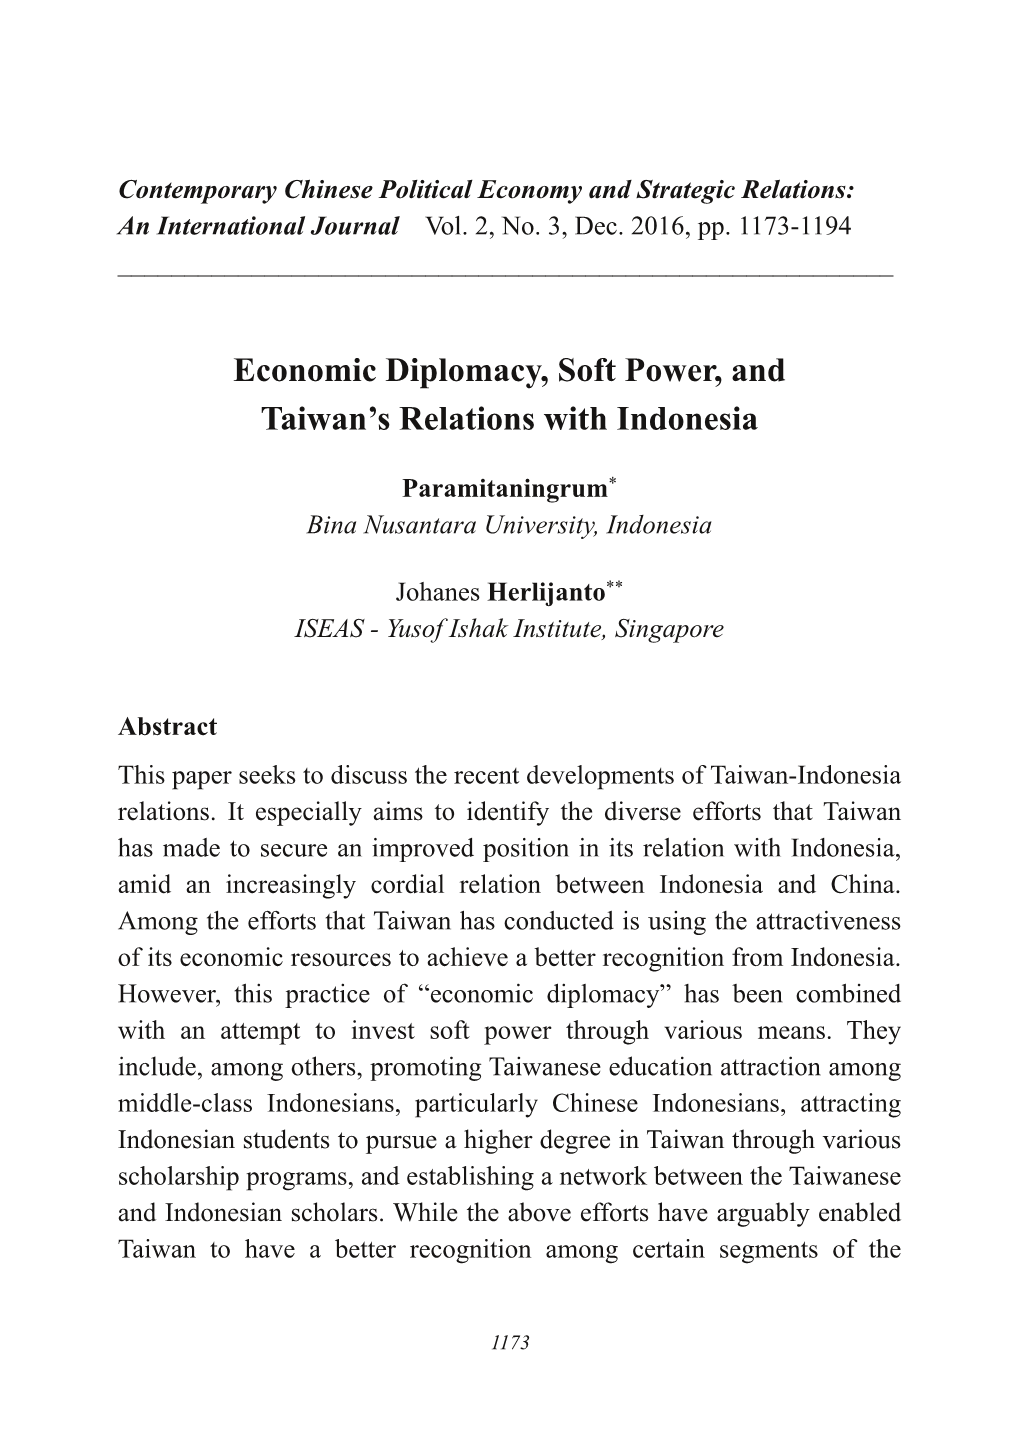 Economic Diplomacy, Soft Power, and Taiwan's Relations with Indonesia